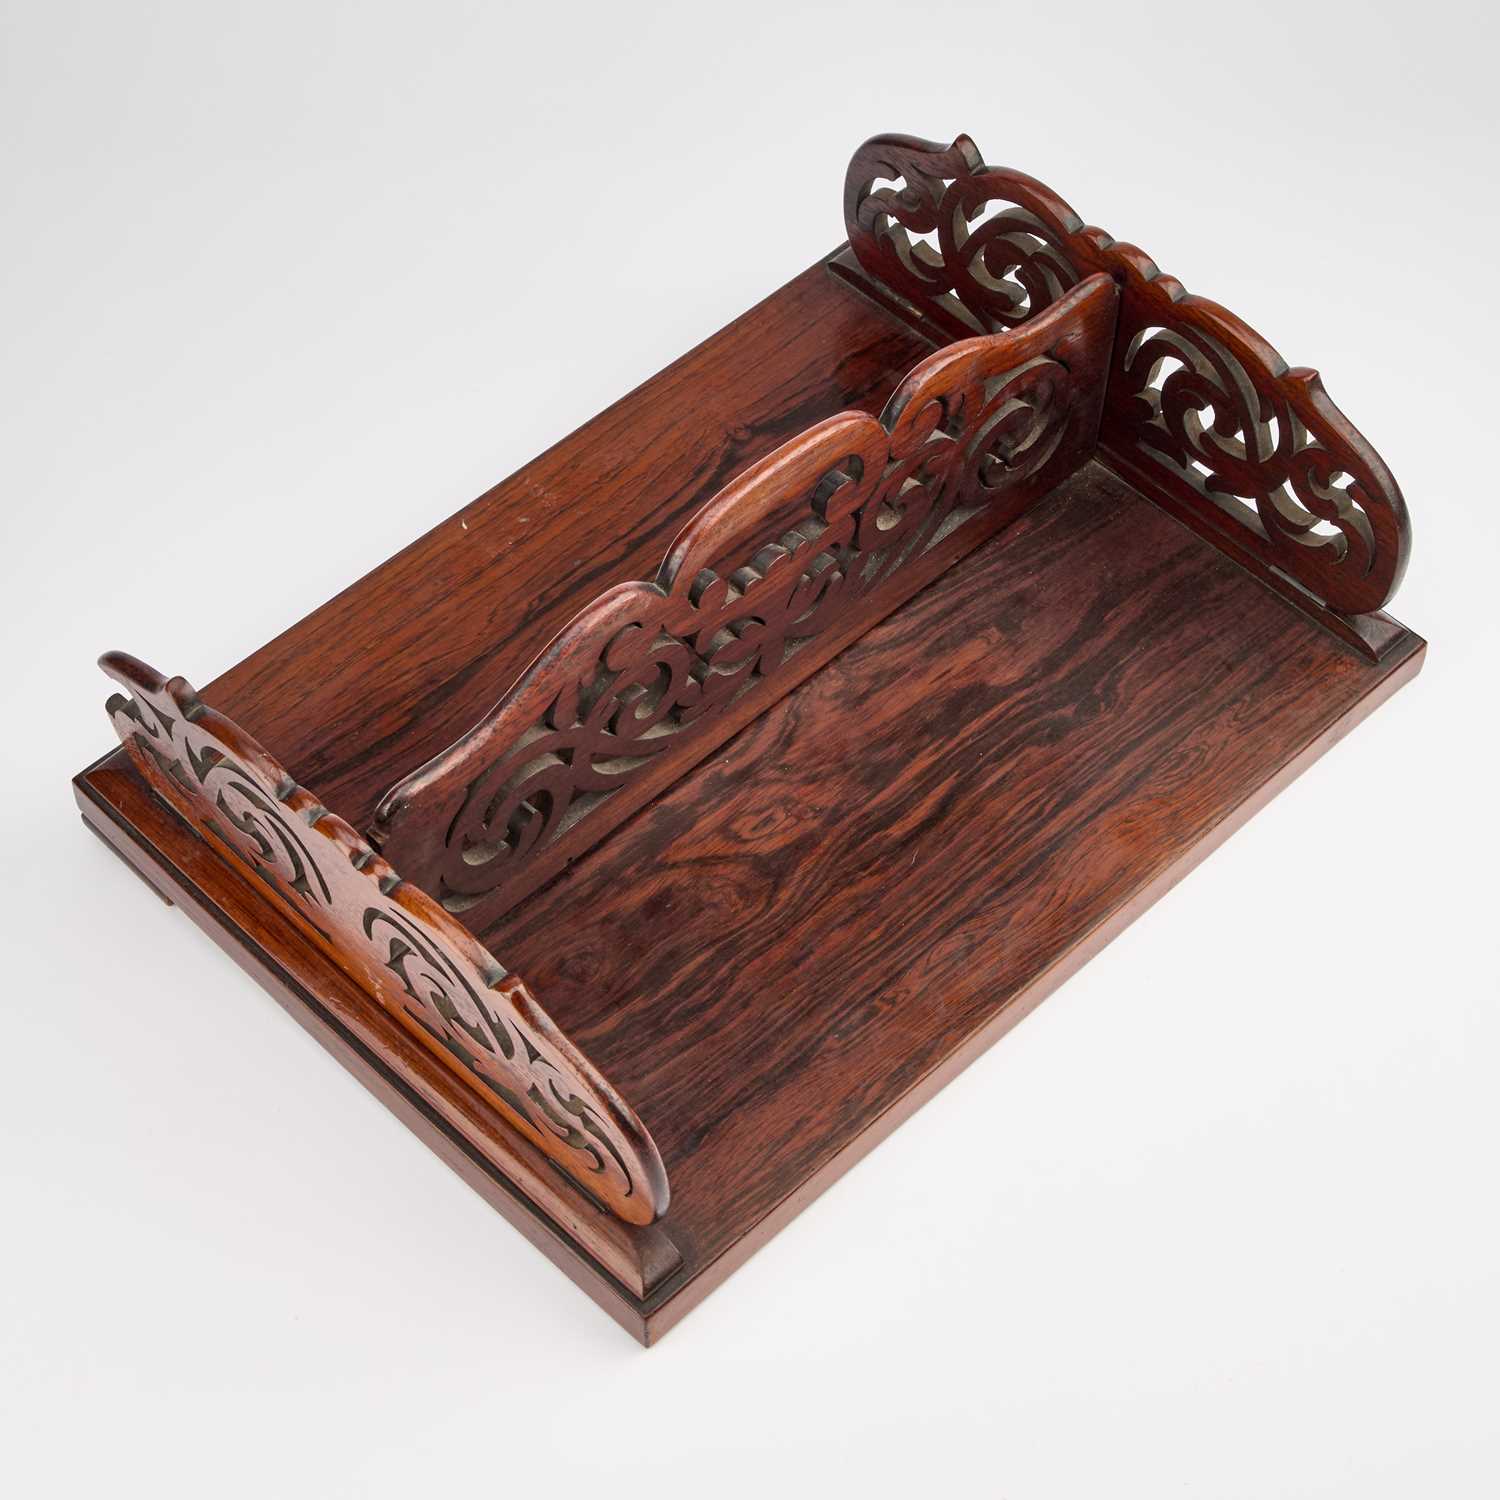 A 19TH CENTURY ROSEWOOD DOUBLE-SIDED BOOK TRAY - Image 2 of 2